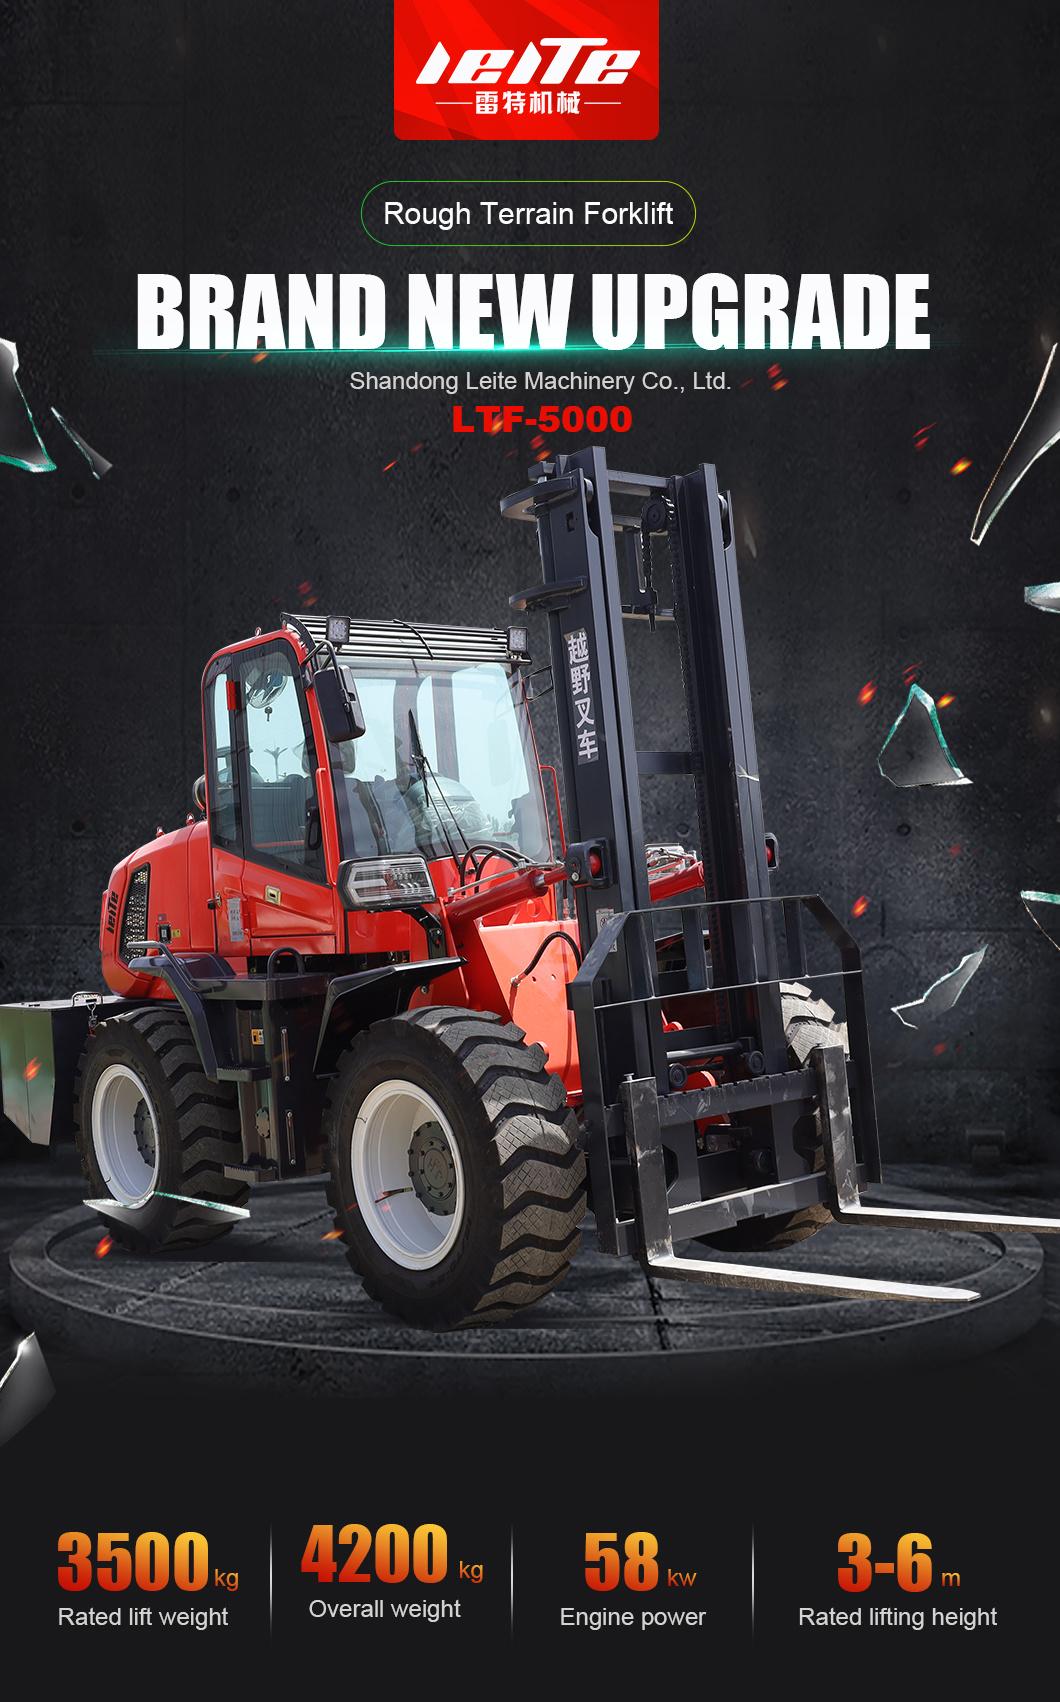 China Cheap 3 Ton 5 Ton 4X4 All Rough Terrain Diesel Forklifts Trucks for Sale Price Rough Terrain Forklift for Sale